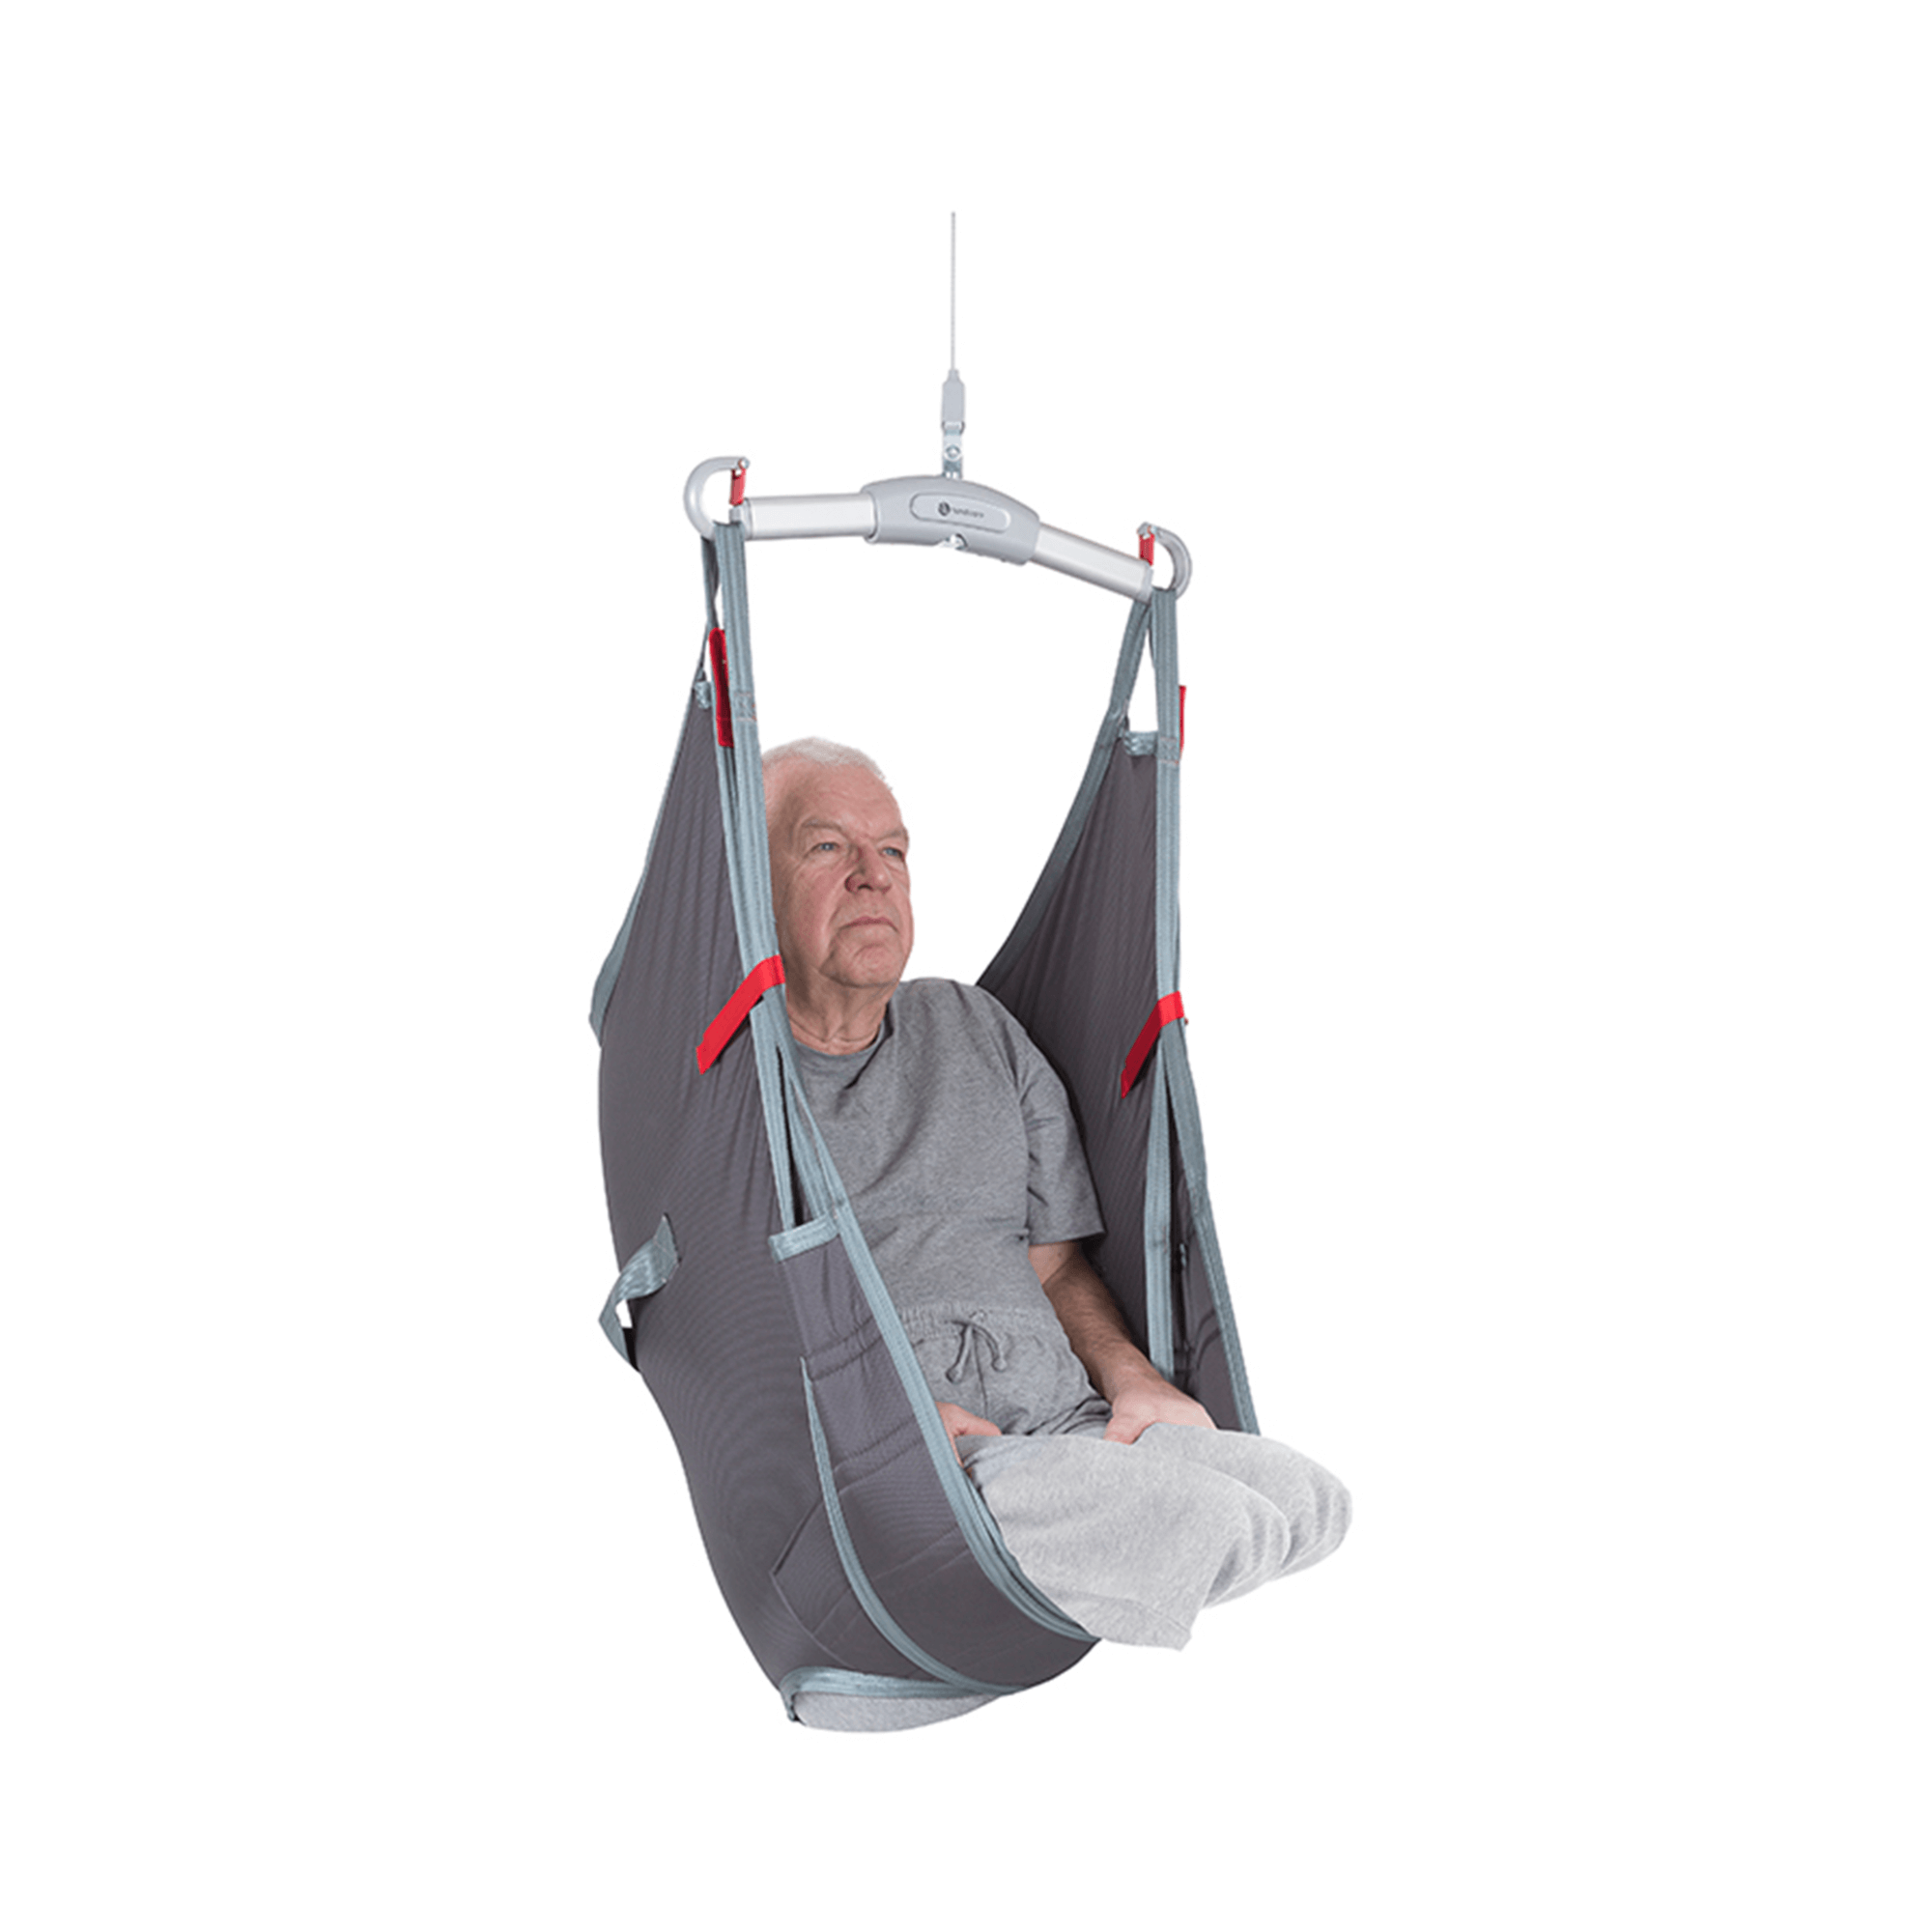 Amputee Sling - Universal Patient Lift Sling for Lifts for Home Use - Transfer Safely with Patient Lifter - Compatible with Hoyer Lift - Easy-to-Use